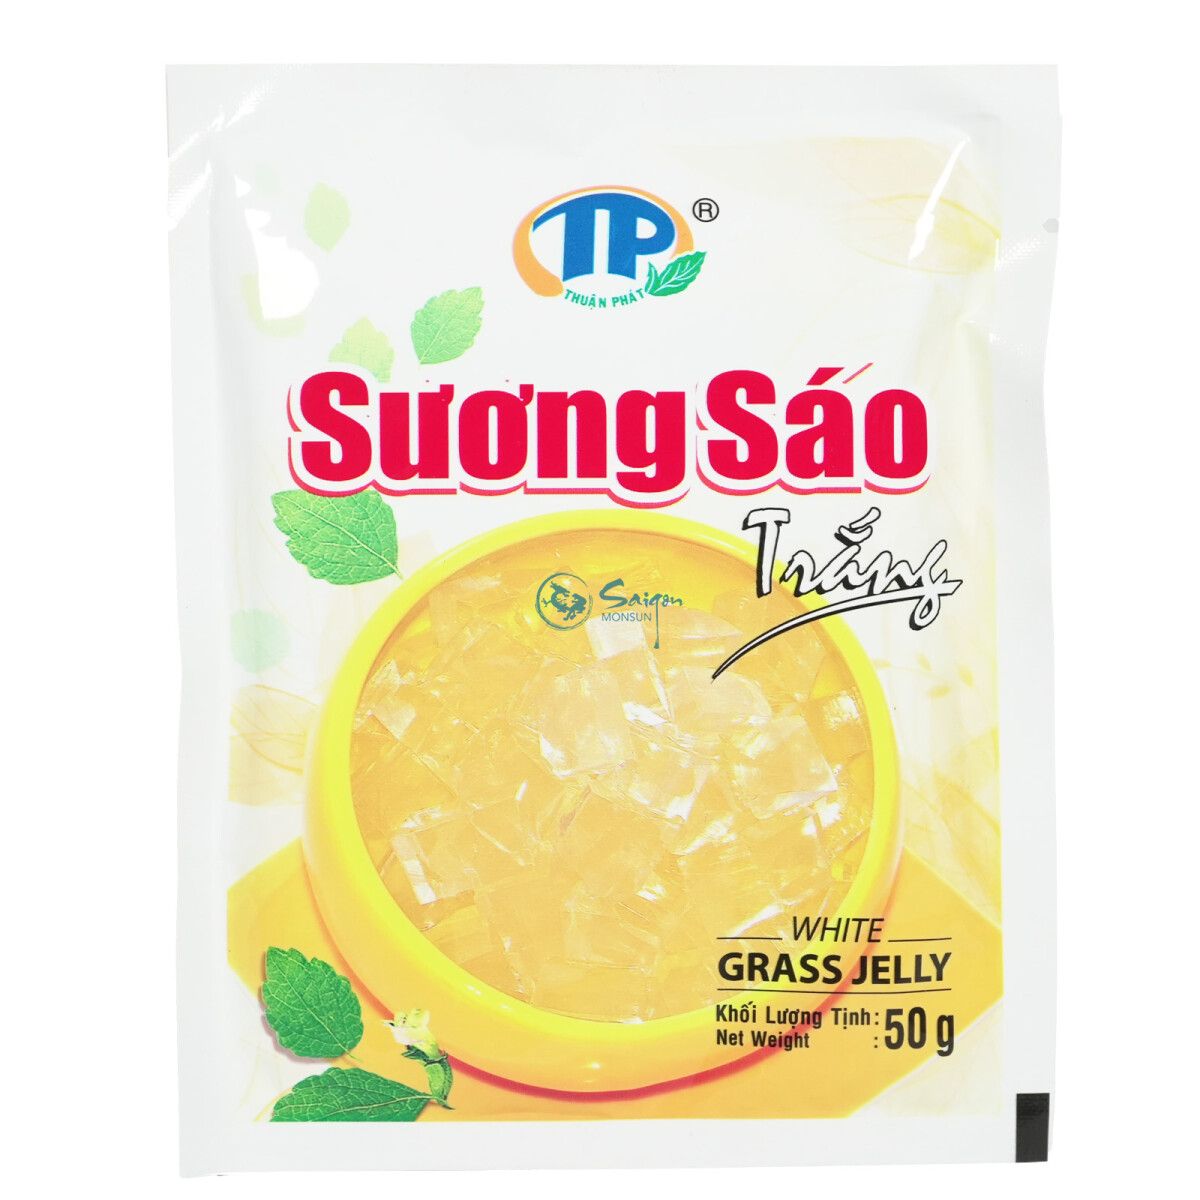 TP Suong Sao weisses Grass Jelly Pulver 50g